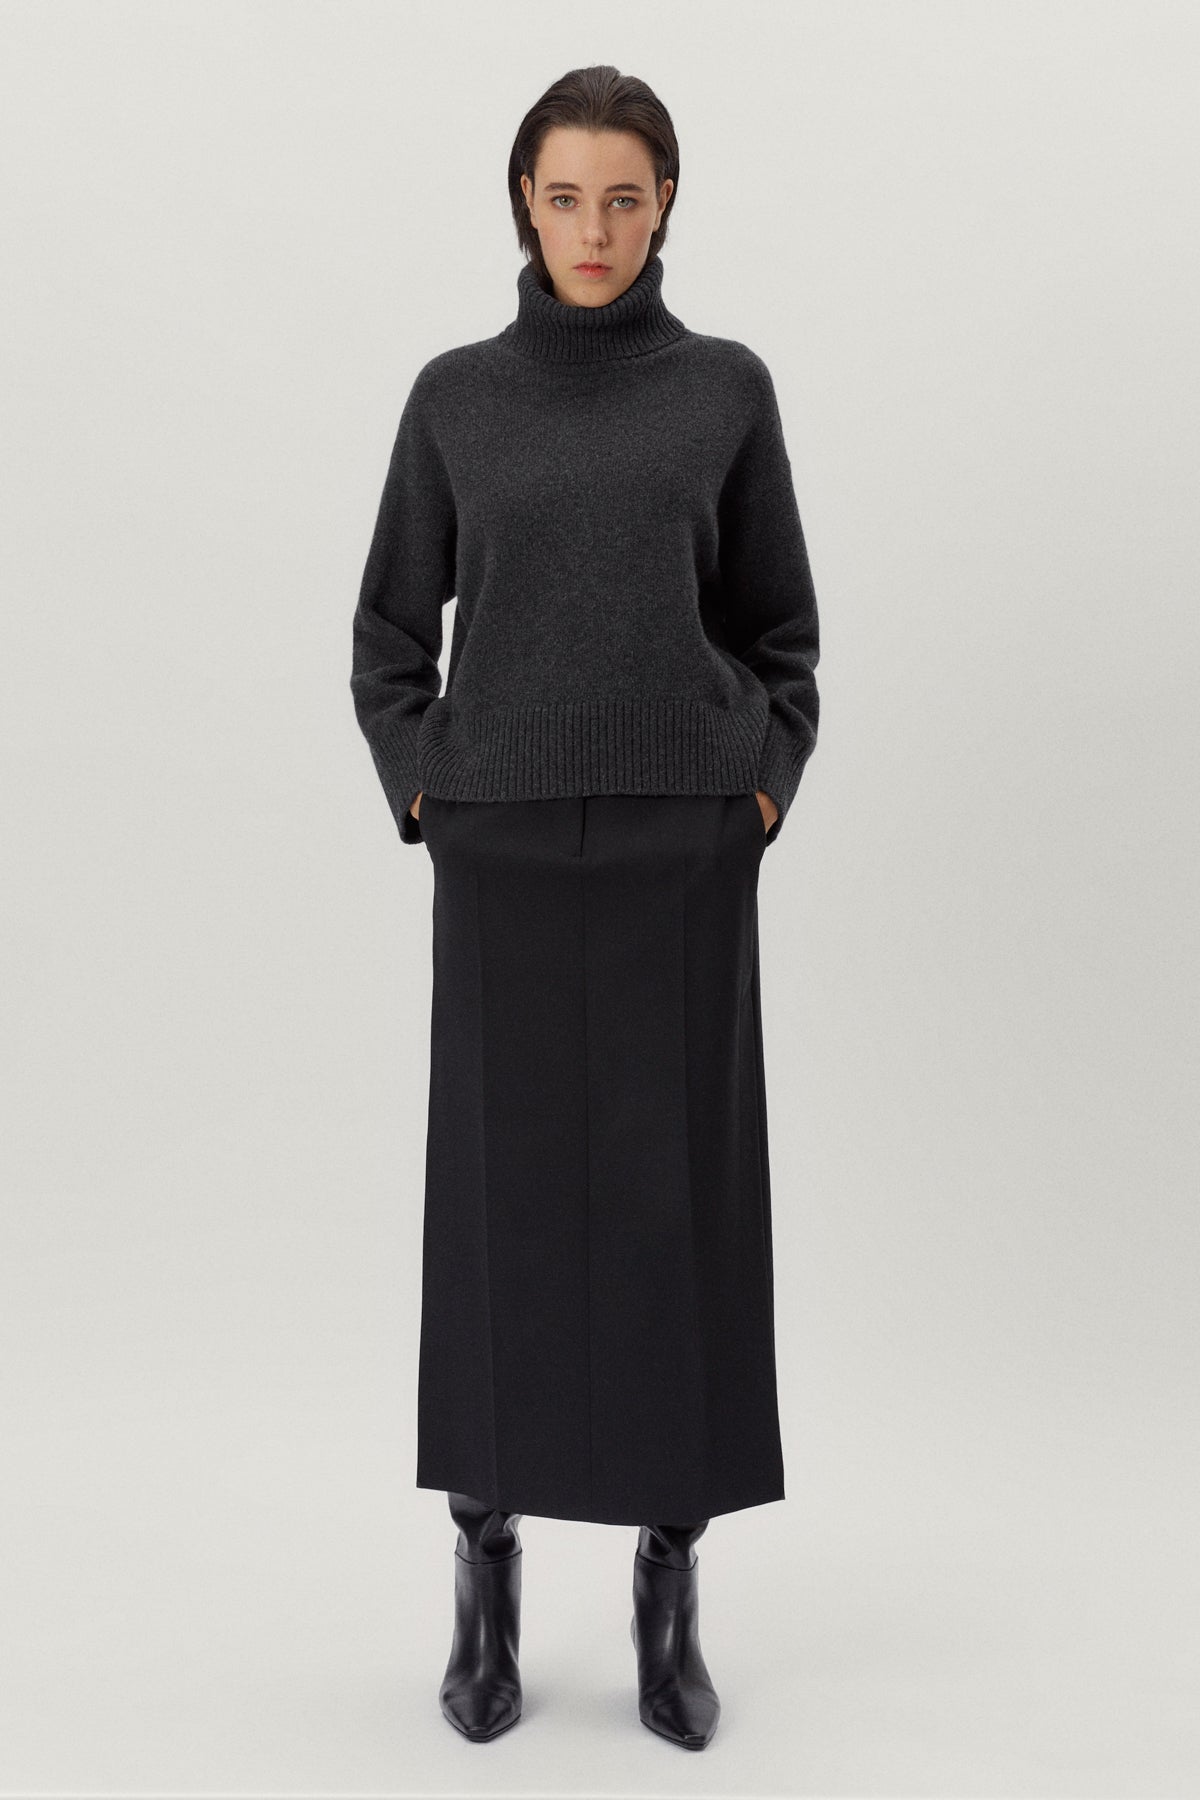 the woolen chunky roll neck ash grey